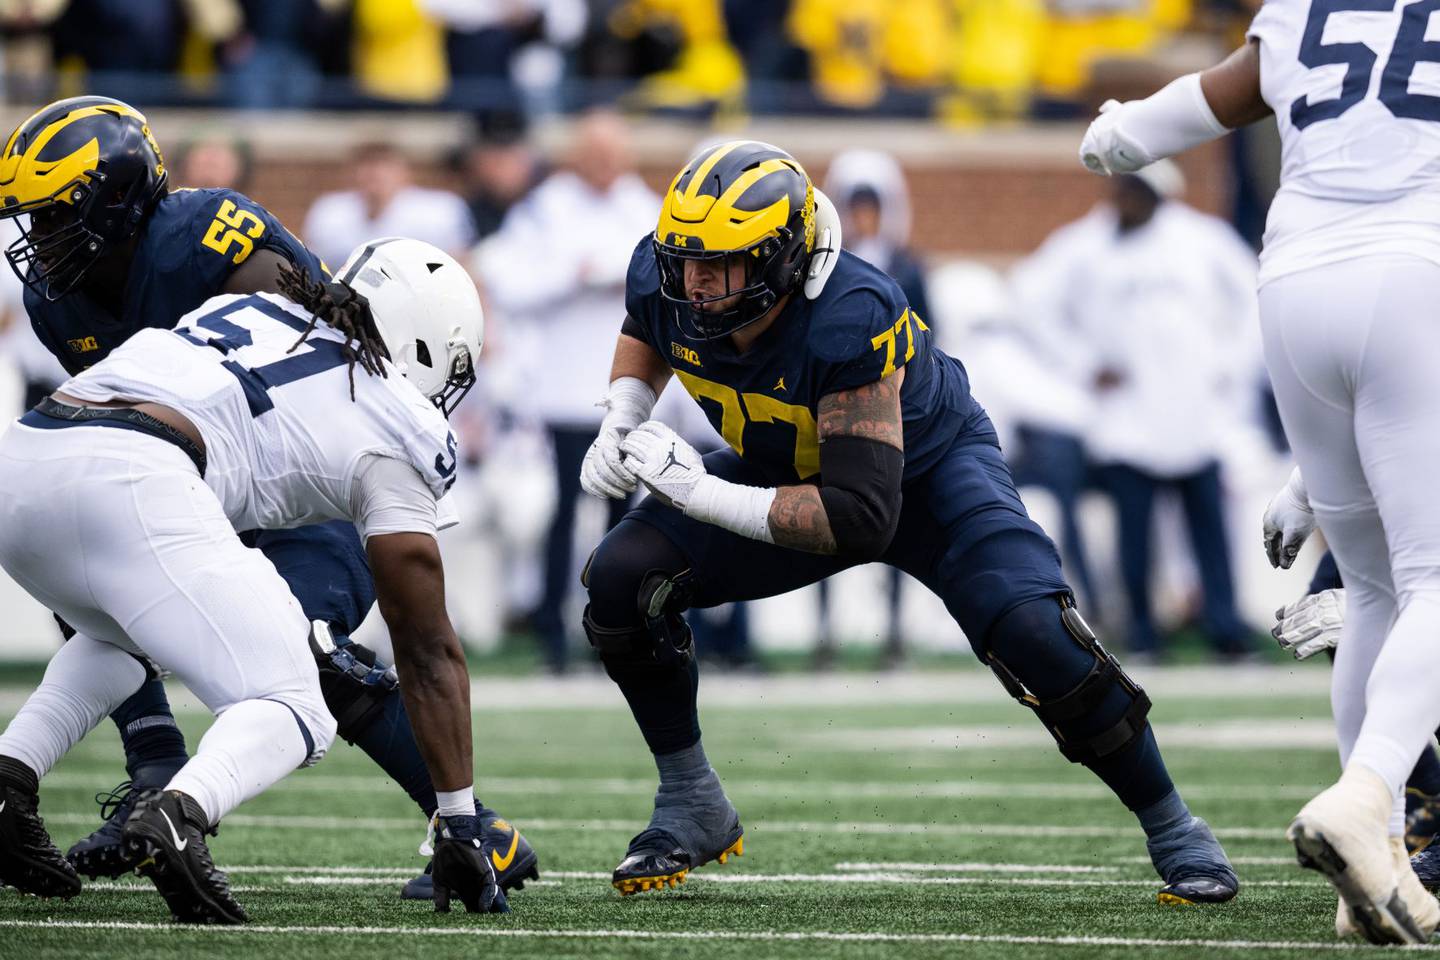 Trevor Keegan, a Crystal Lake South graduate, and his line mates continue to thrive, helping Michigan power its way to 241.7 rushing yards a game and allowing only nine sacks in seven games, which ranks in the top 30 nationally.